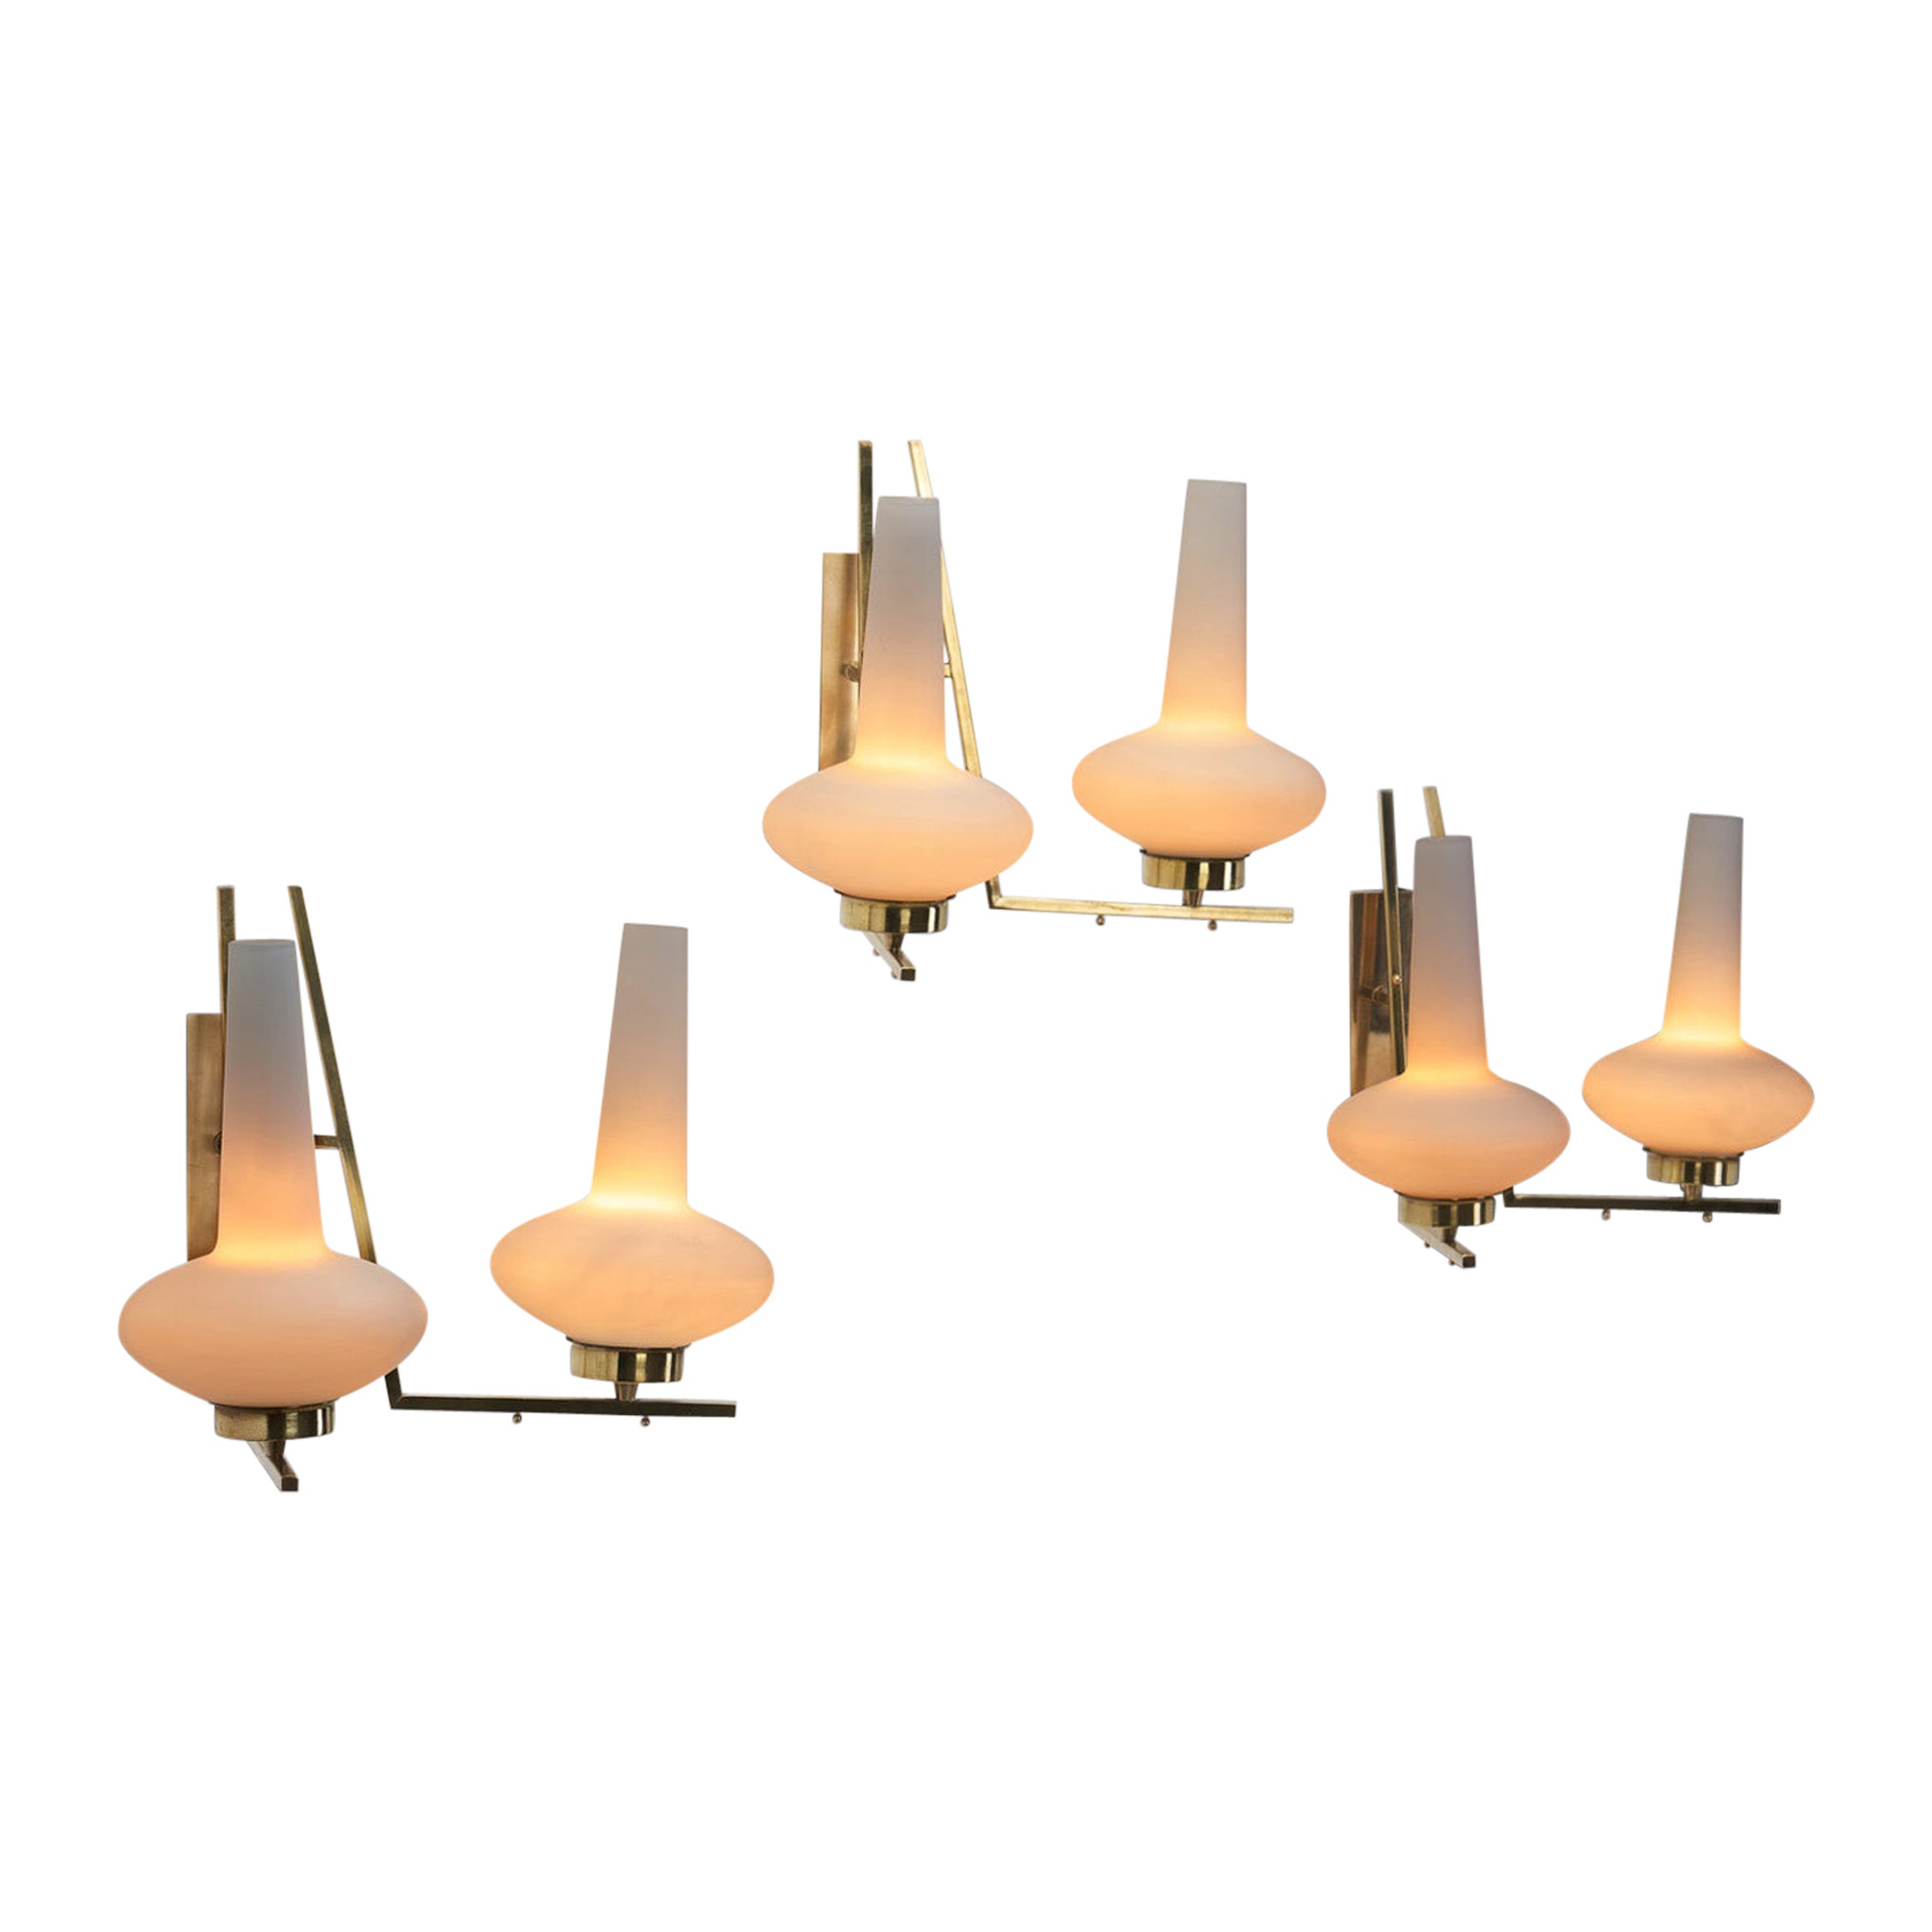 Italian Mid-Century Modern Brass and Glass Wall Lamps, Italy 1950s